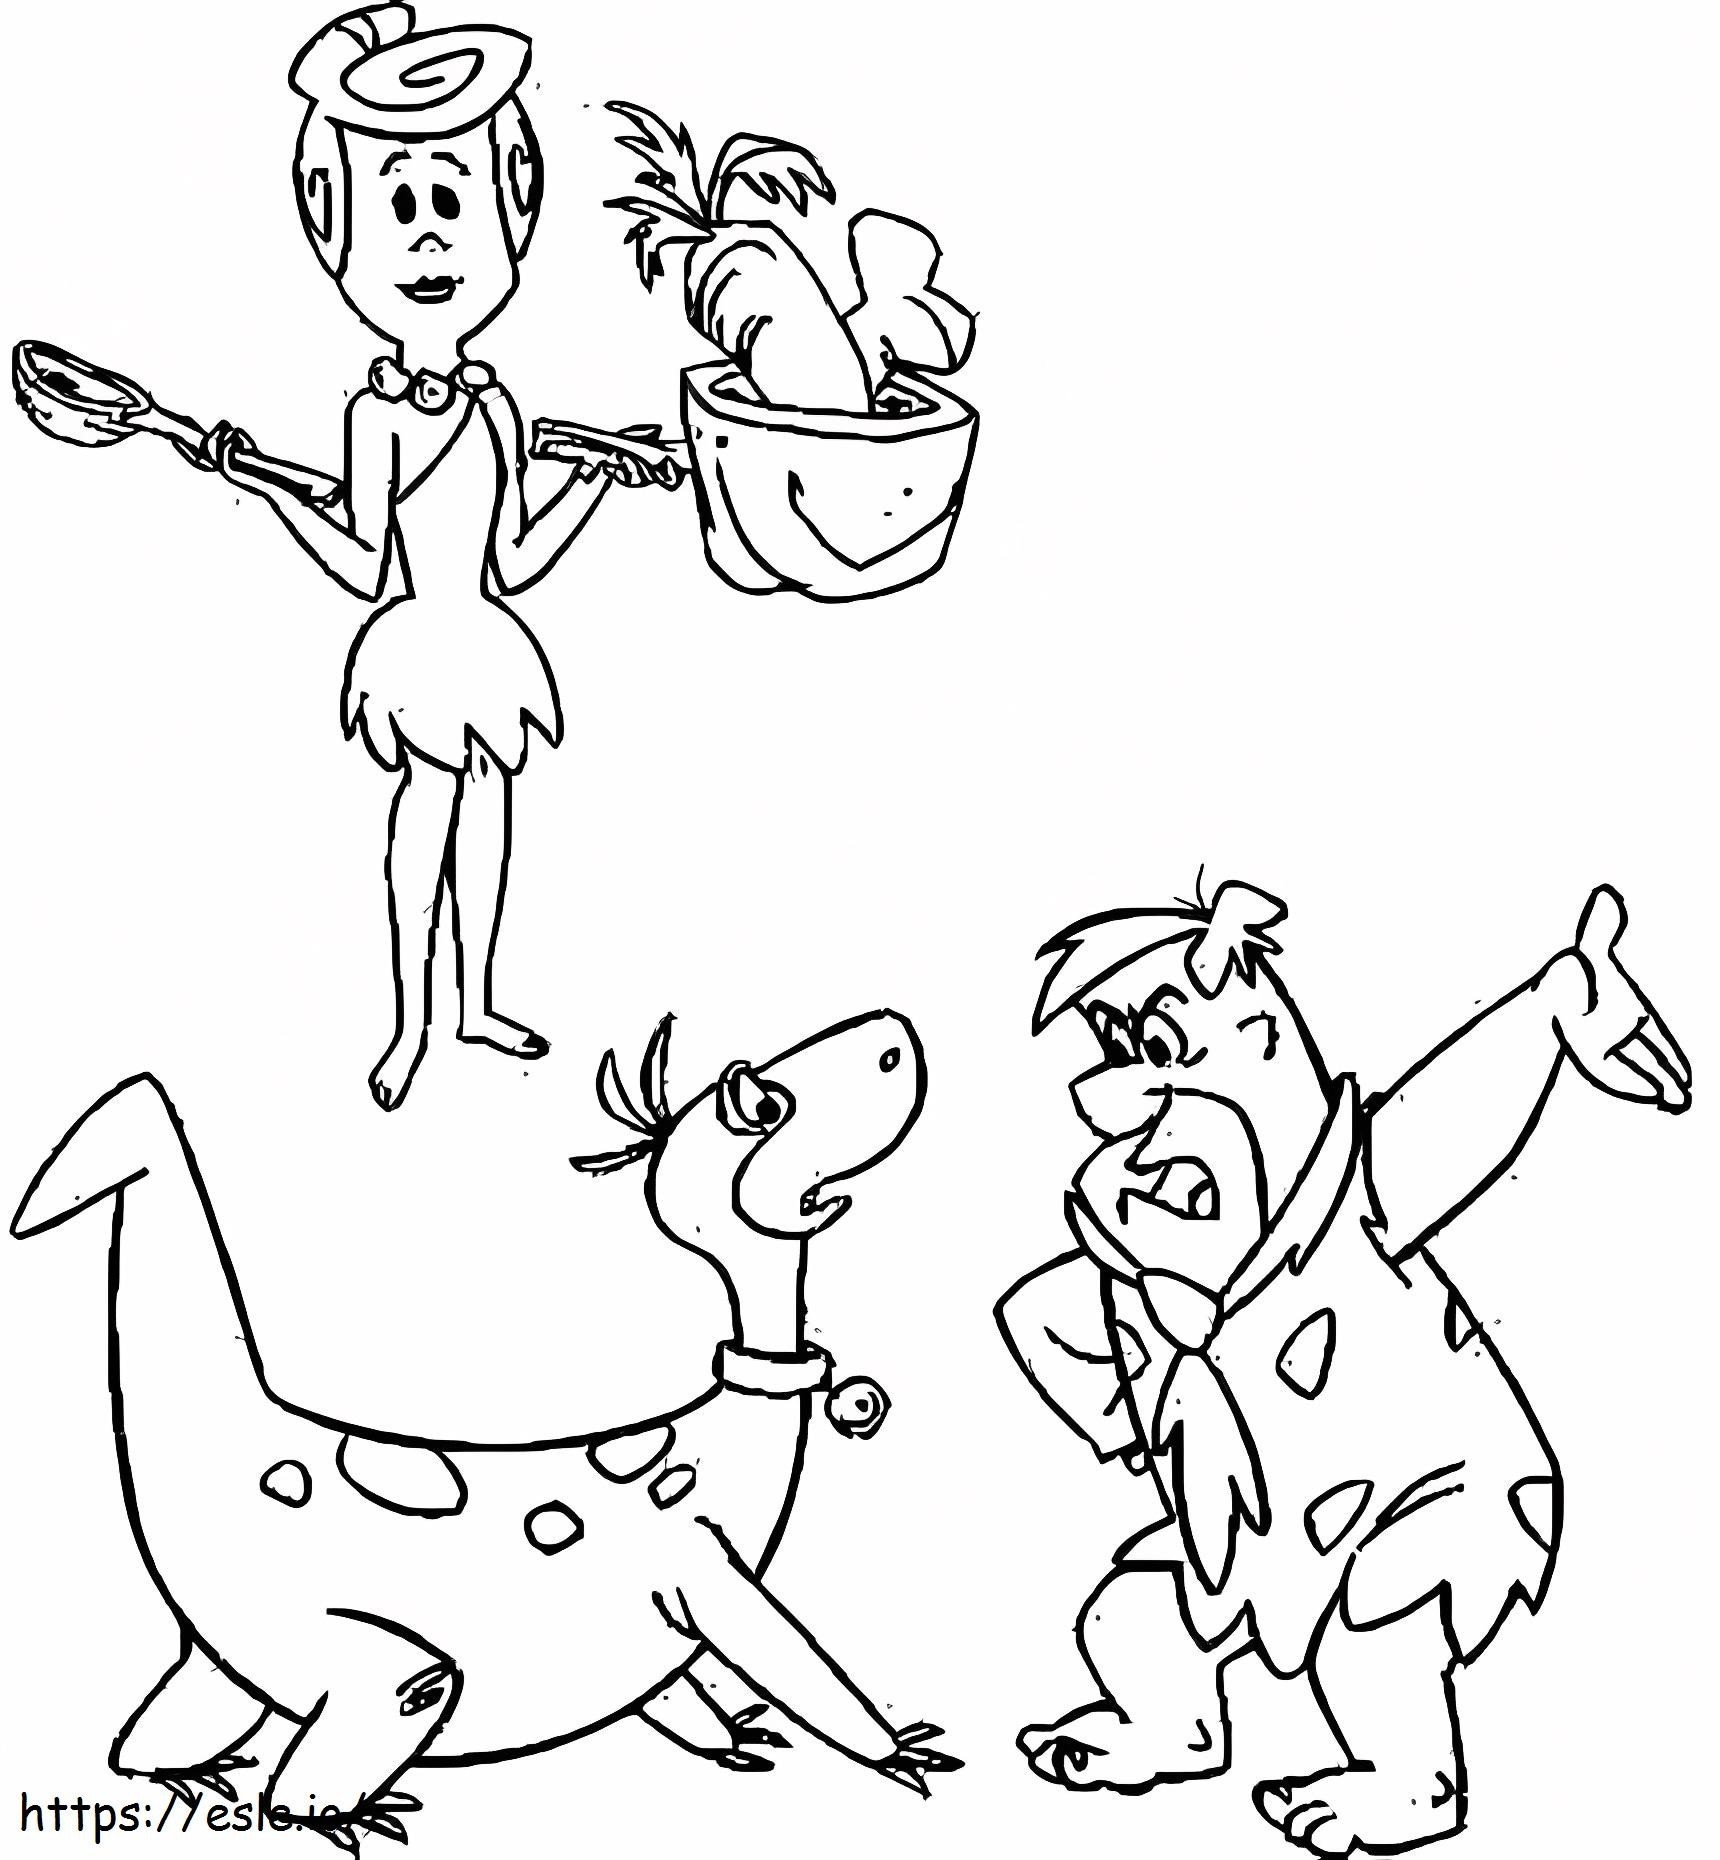 Characters From The Flintstones coloring page